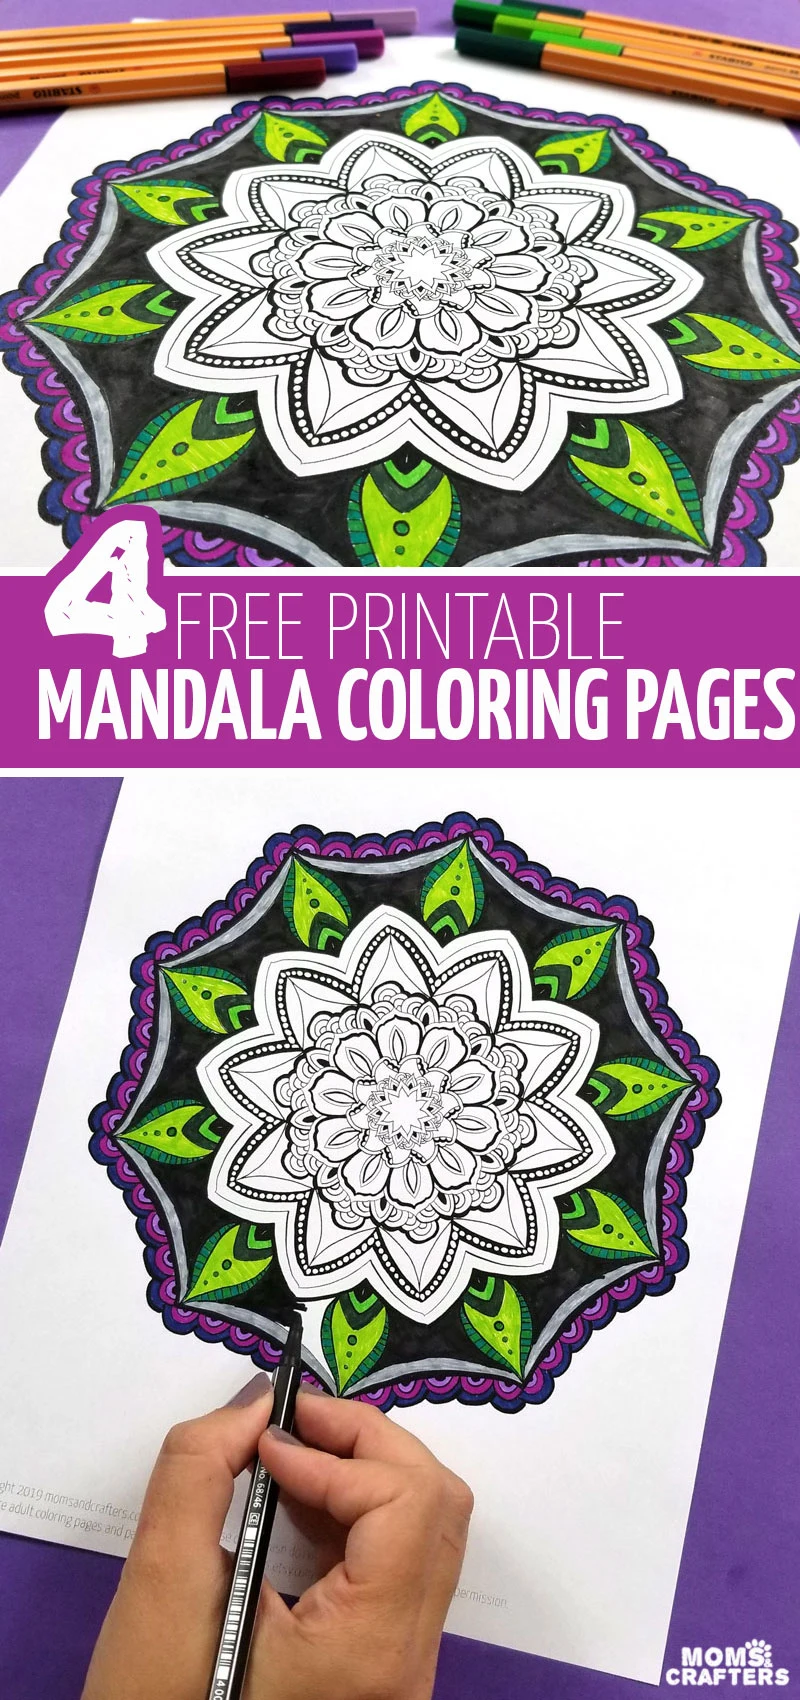 4 free printable mandala coloring pages for adults, teens, and tweens! Try some mindful, stress-reducing, relaxing colouring for grown-ups